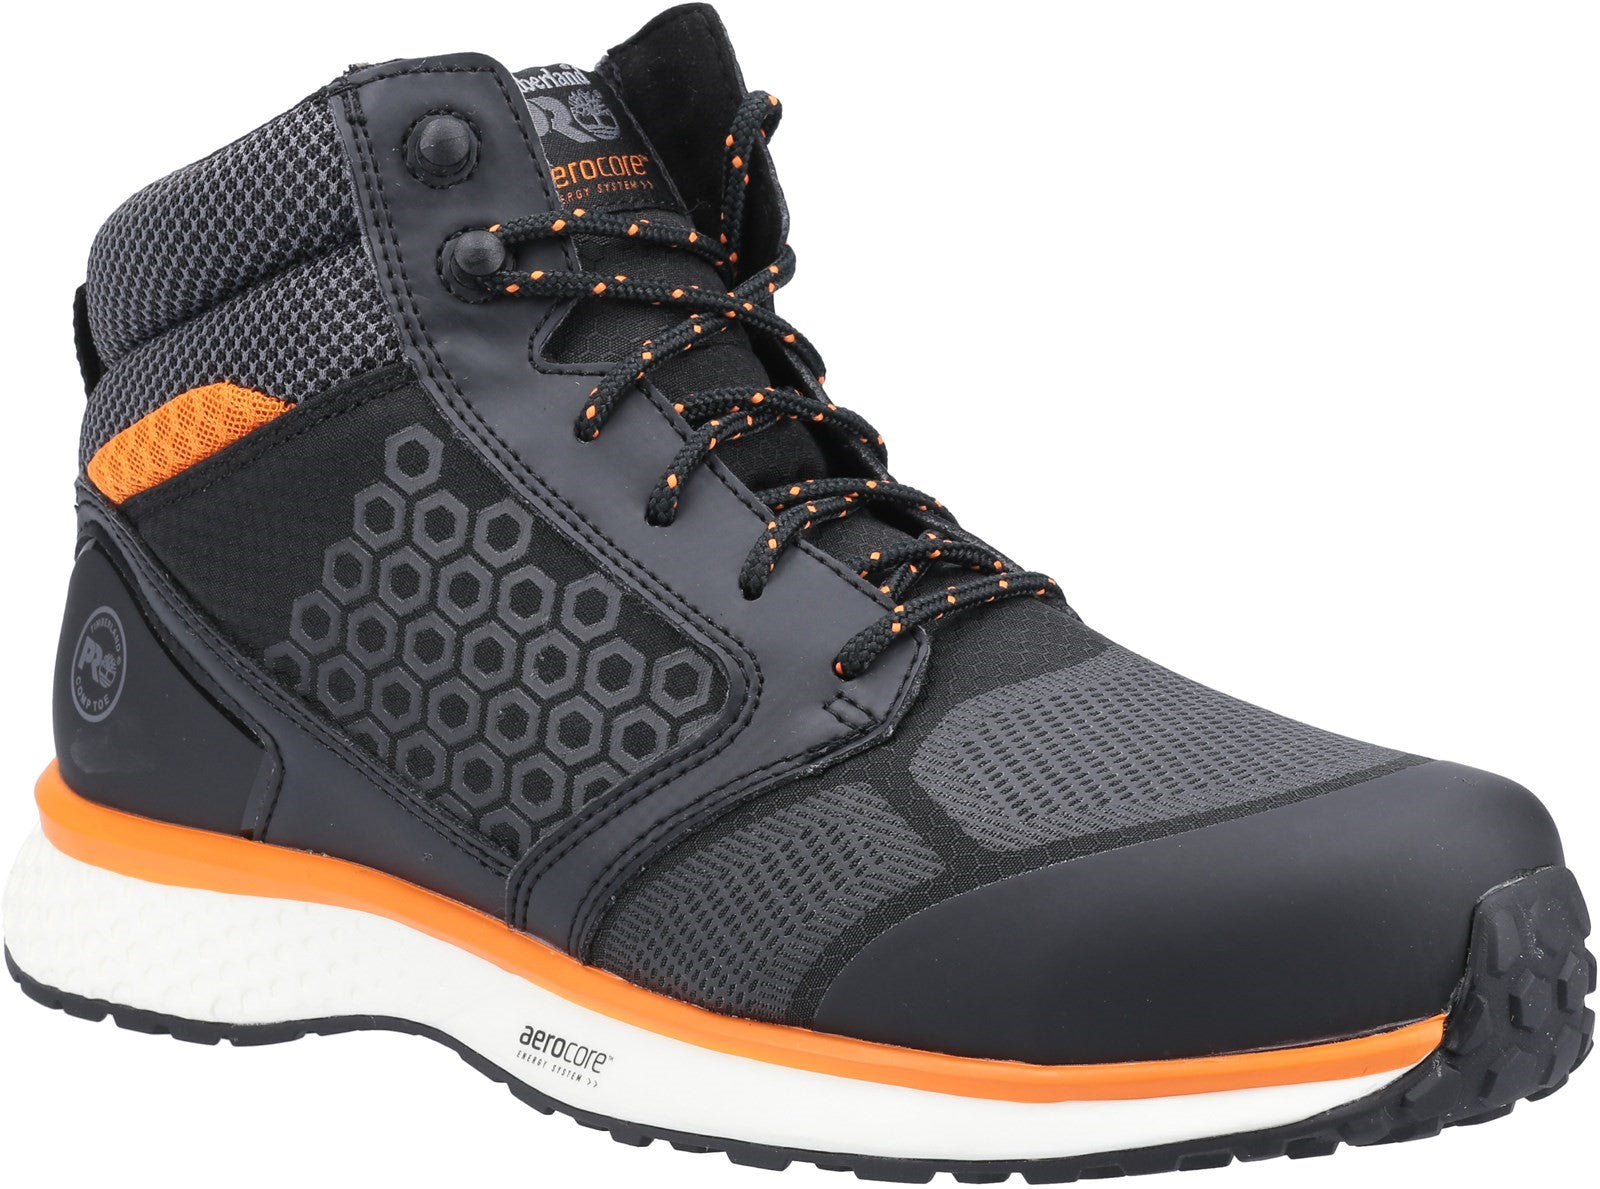 Timberland Pro Reaxion Mid S3 black/orange composite toe/midsole safety boots